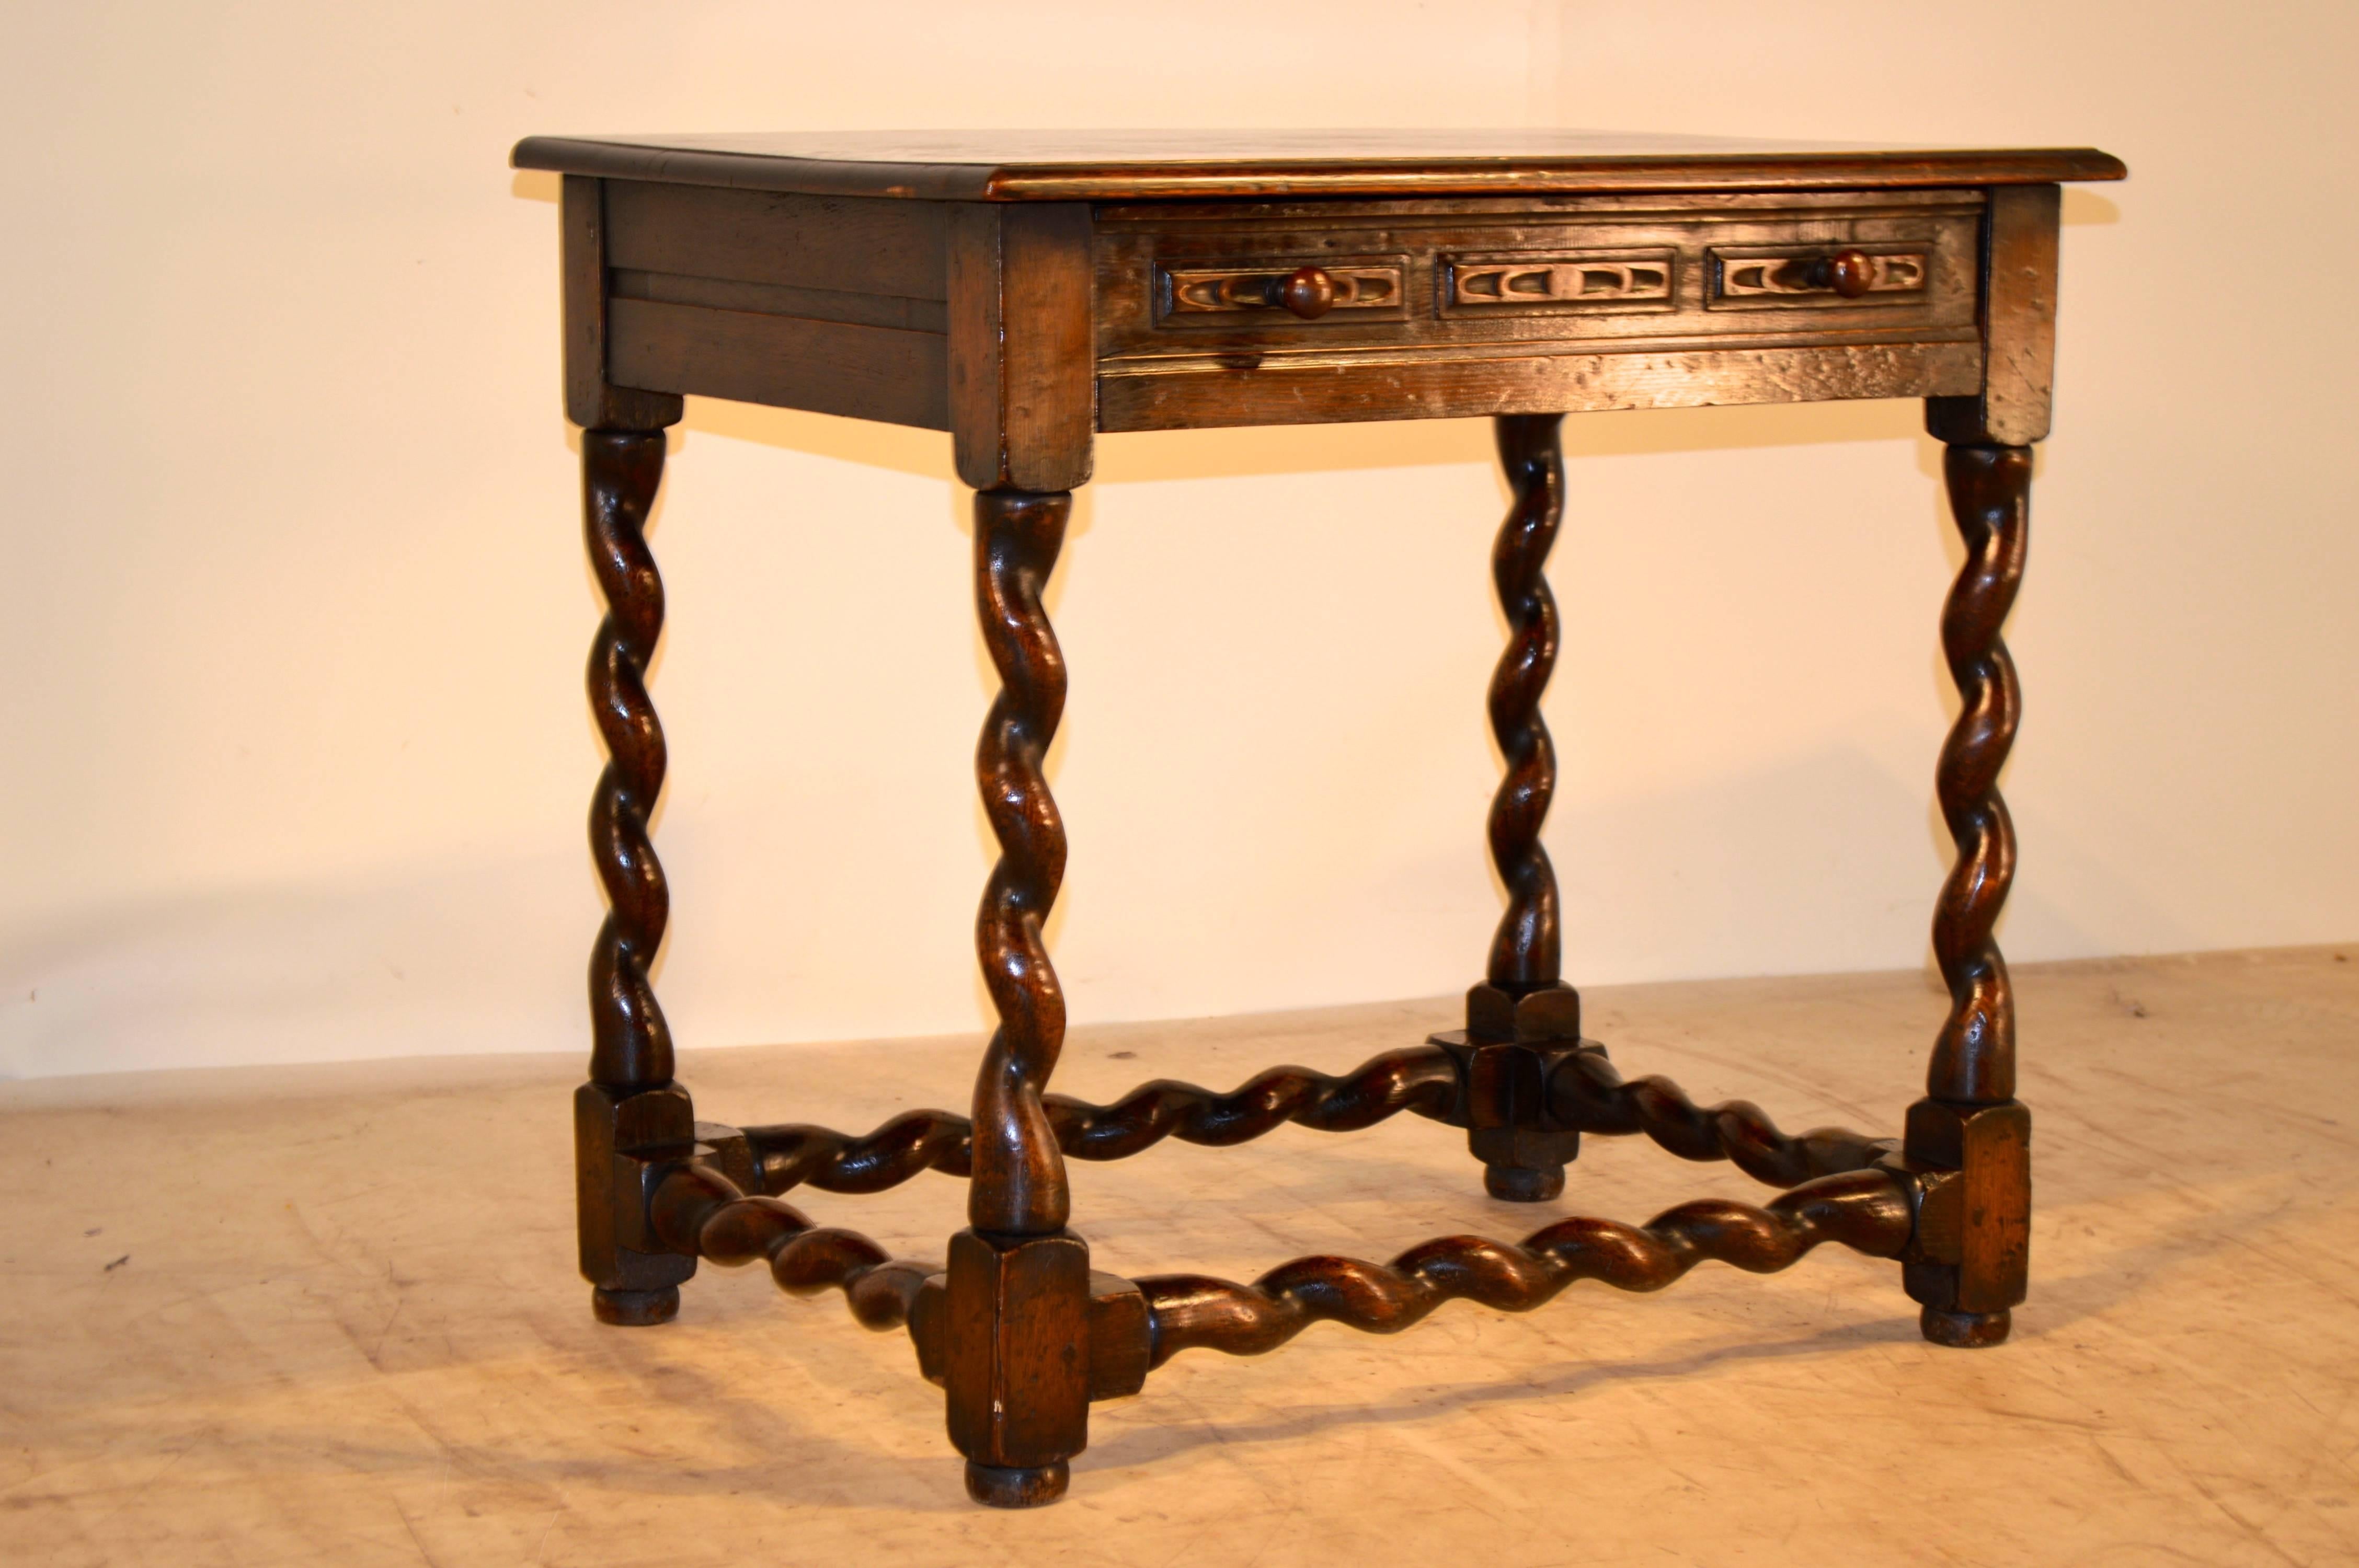 19th century English oak side table with a beveled edge around the top following down to channeled sides and a single drawer with hand-carved decoration. The legs and stretchers are an unusual version of a barley-twist.